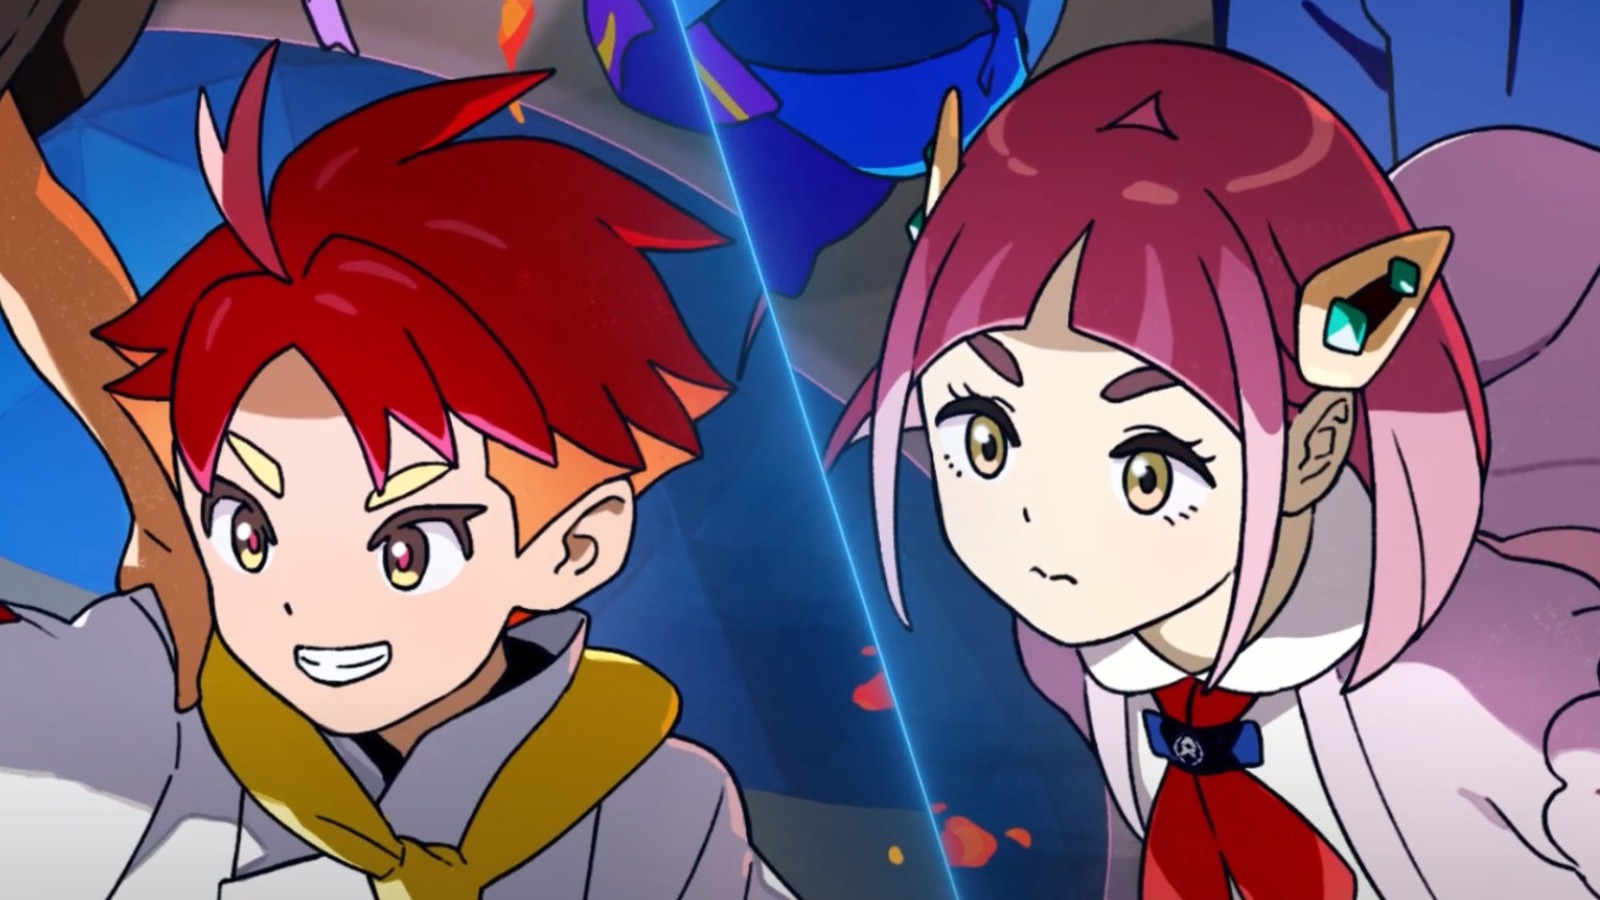 The new Pokémon Scarlet and Violet anime looks like a blast in its first  trailer - The Verge